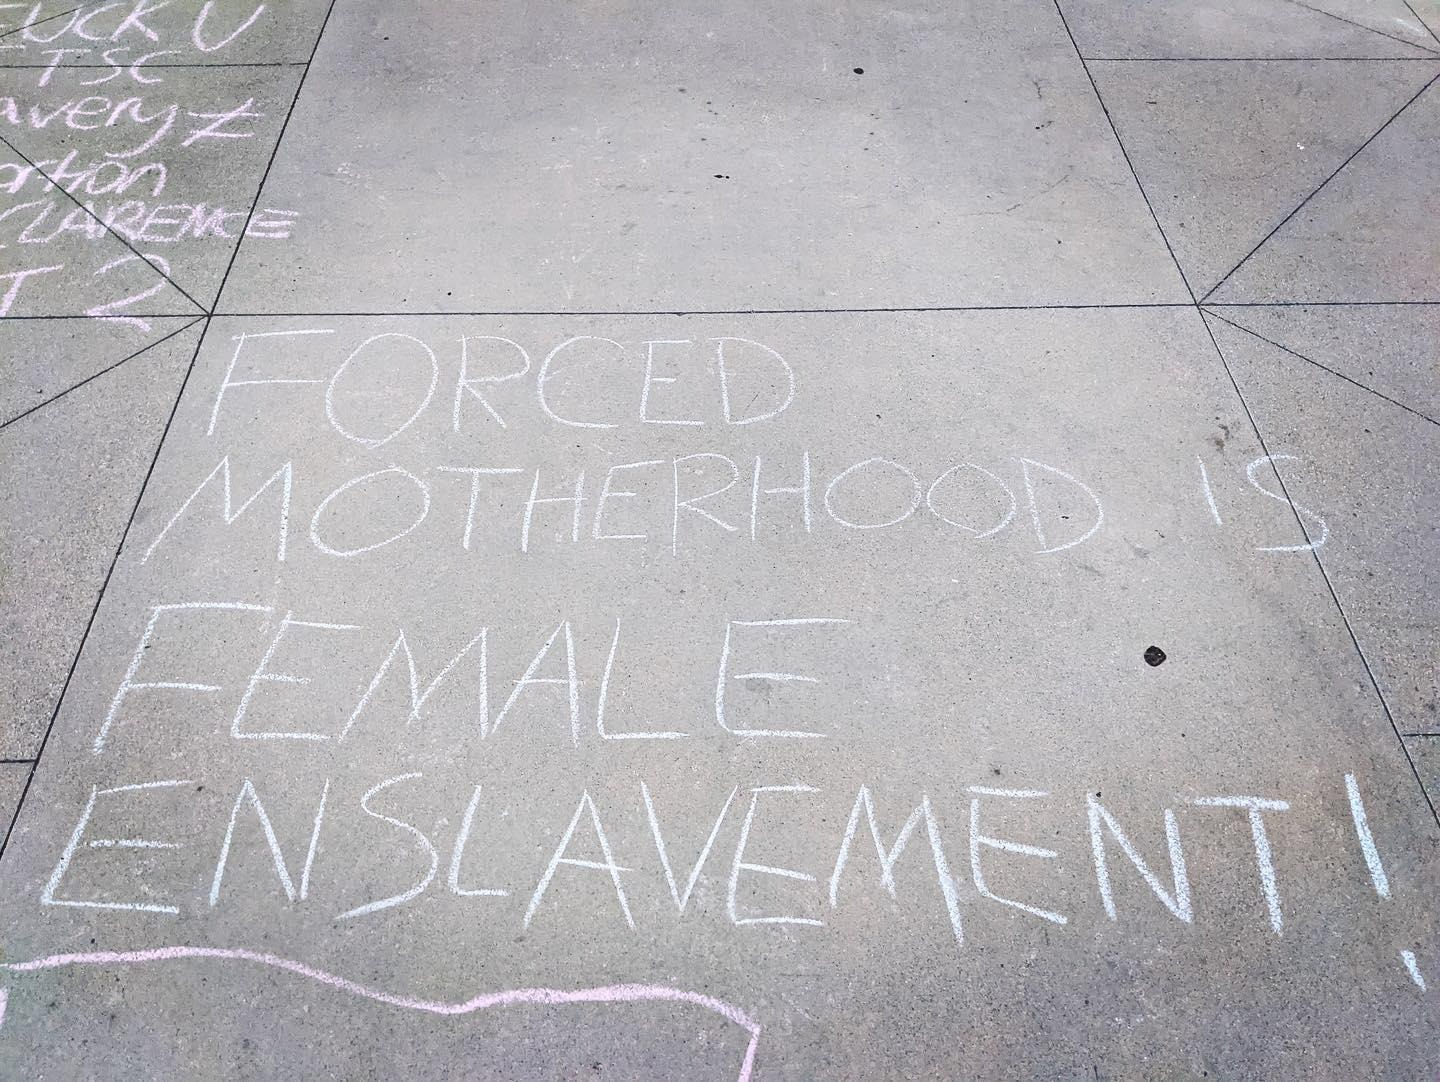 Chalking a sidewalk should not be a felony -- Drop the Charges against the #Riverside8